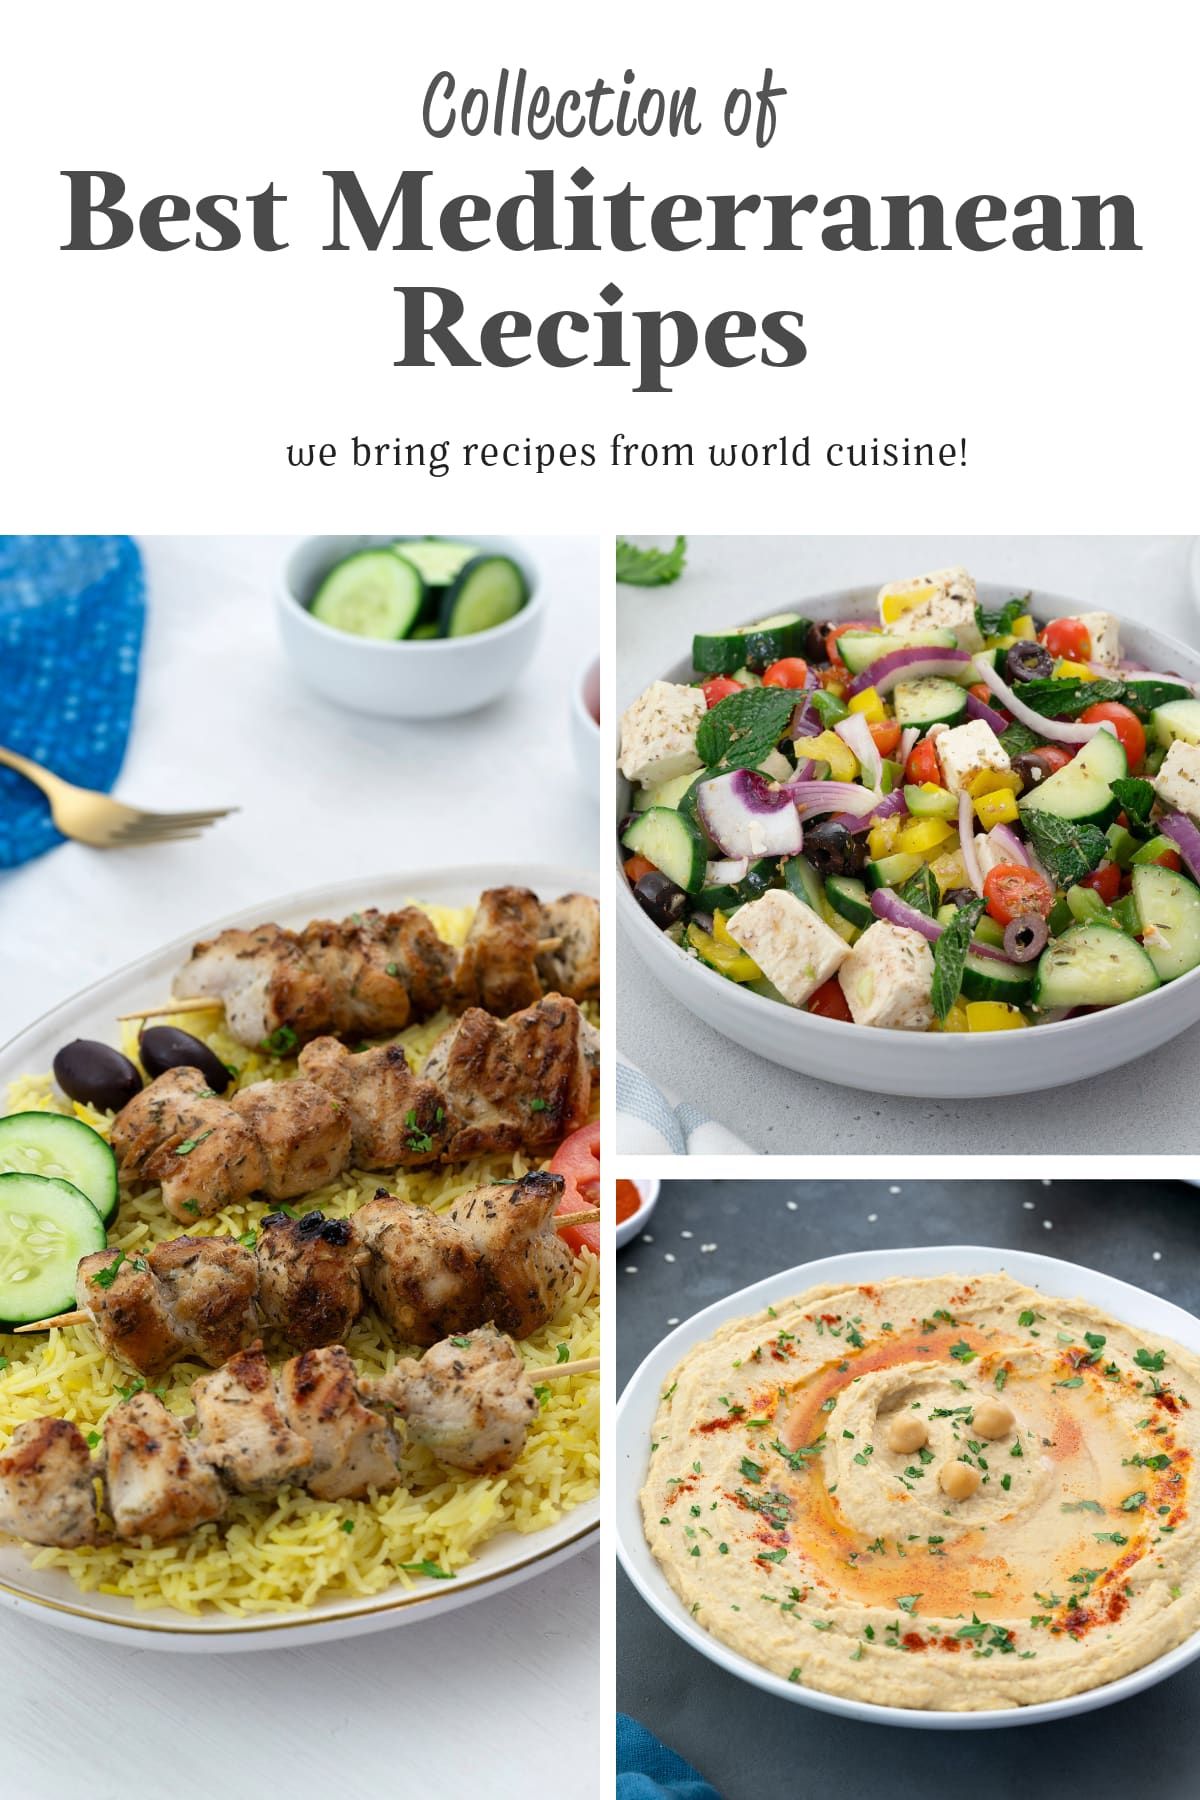 Image collage of Mediterranean dishes including chicken souvlaki, Greek salad, and hummus, all served in plates and bowls.